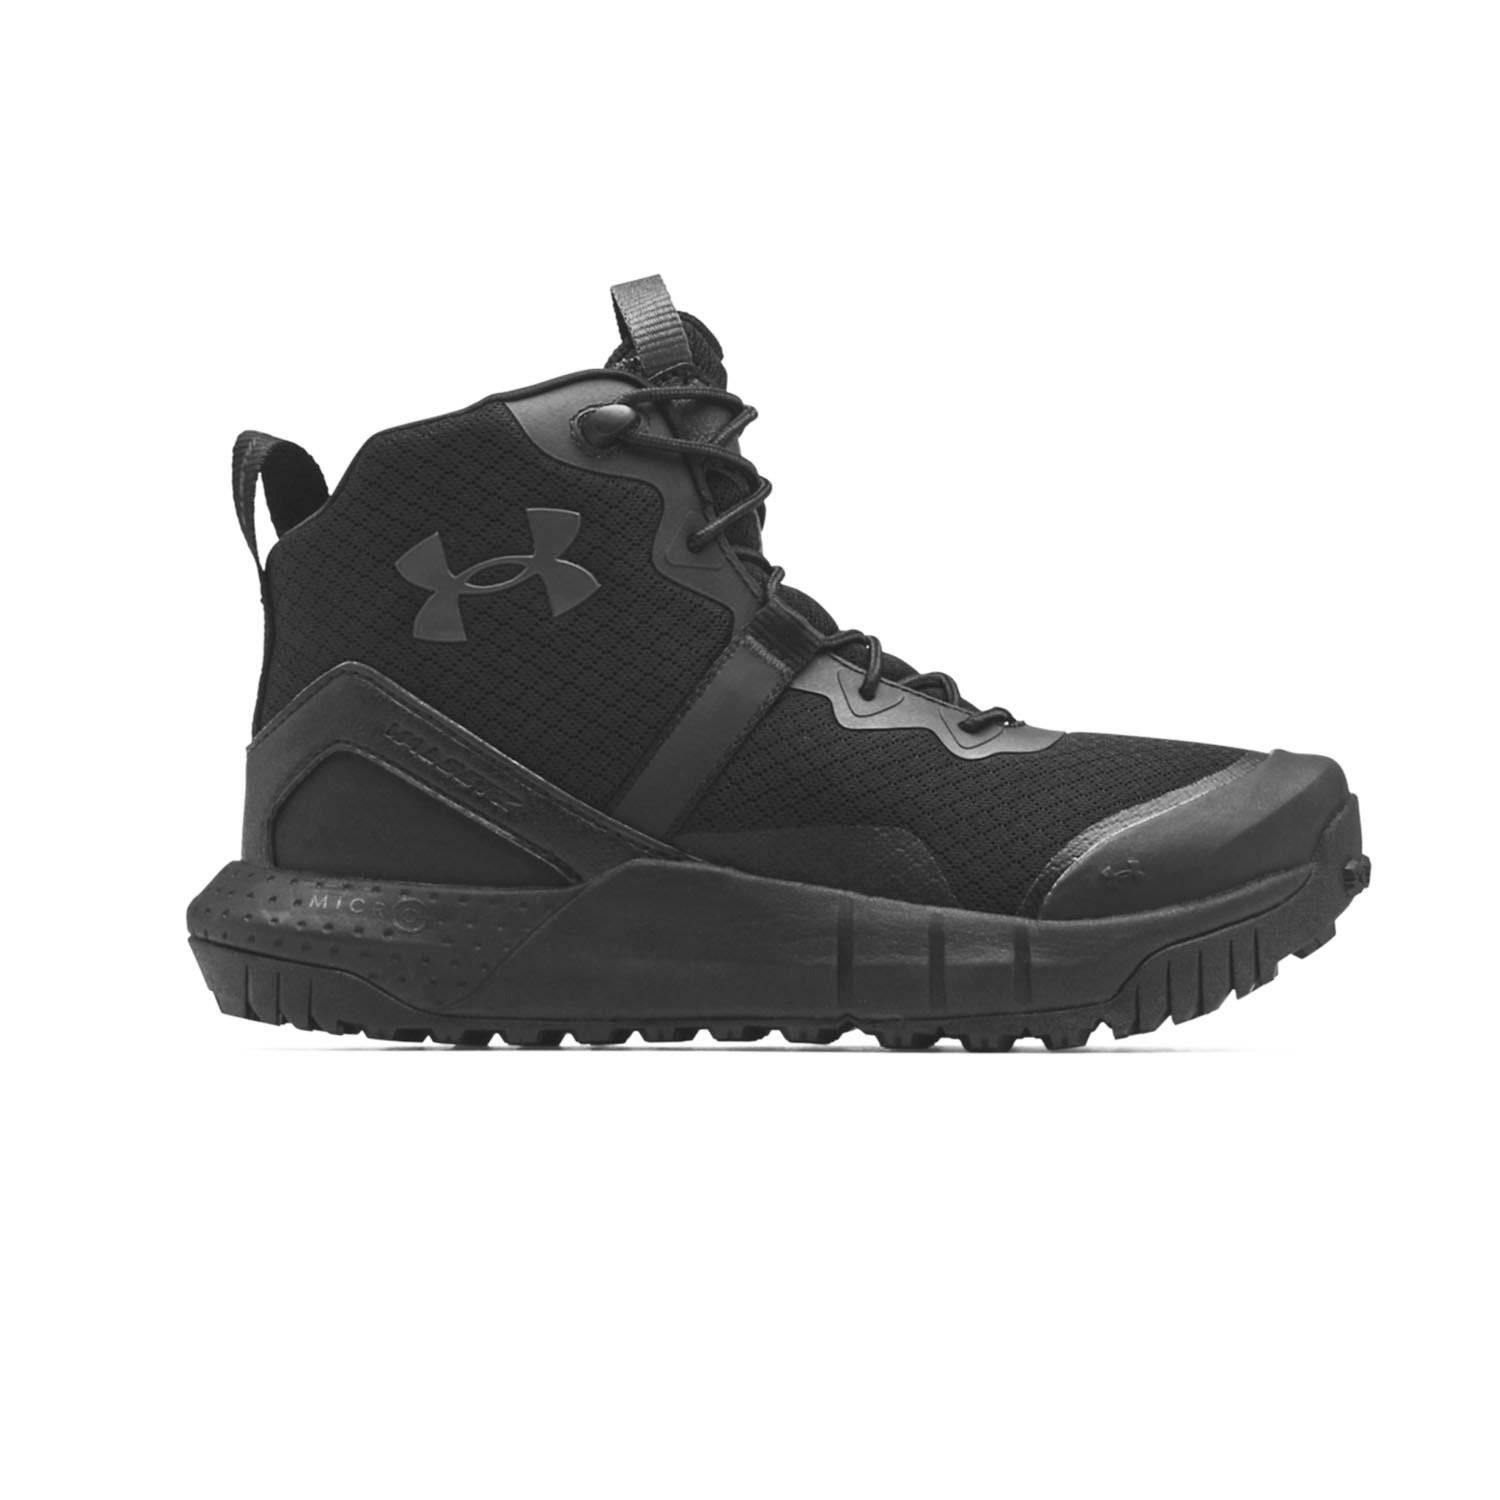 Under Armour Boots, Duty Boots 